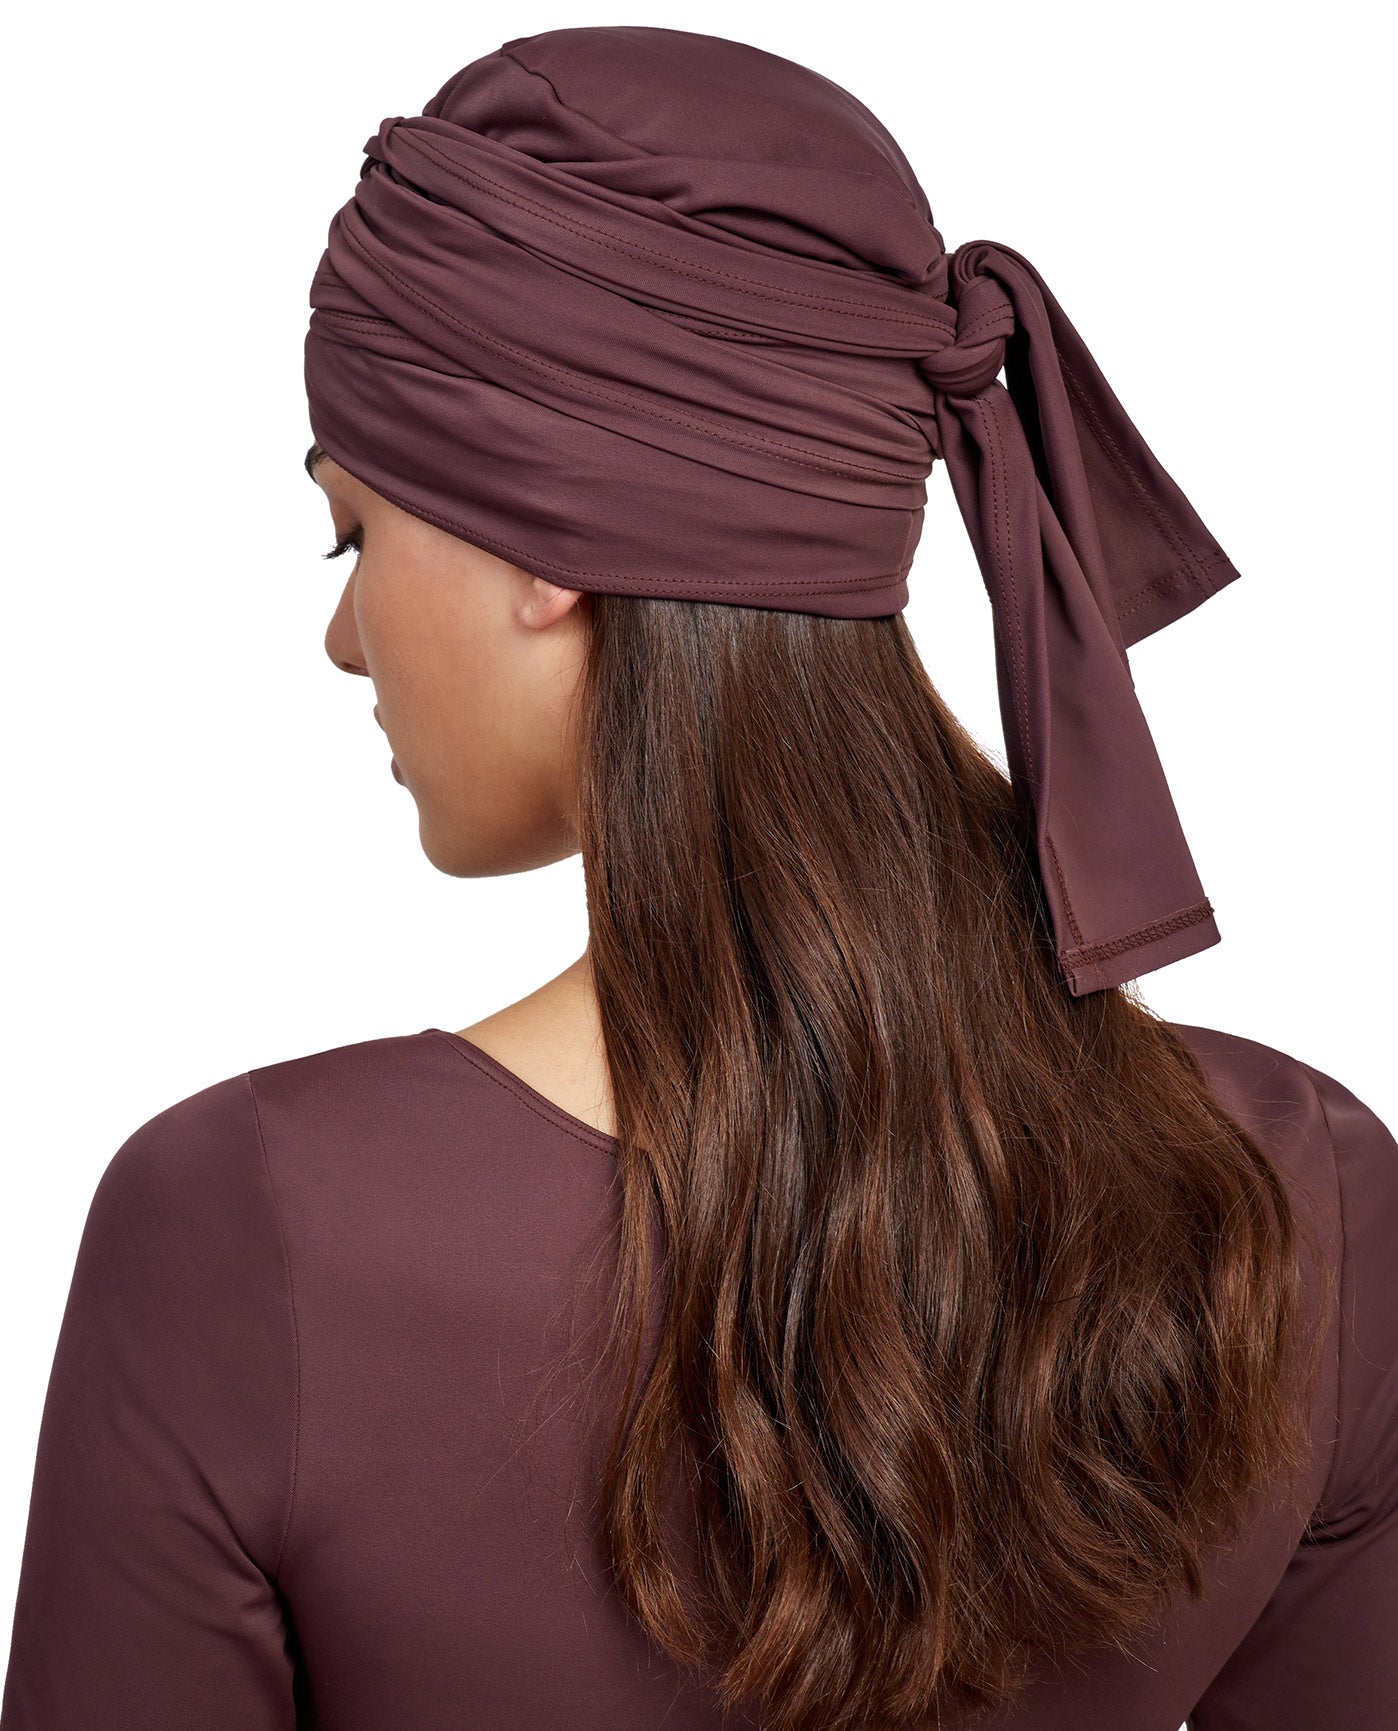 Back View Of Gottex Modest Hair Covering With Tie | GOTTEX MODEST BROWN